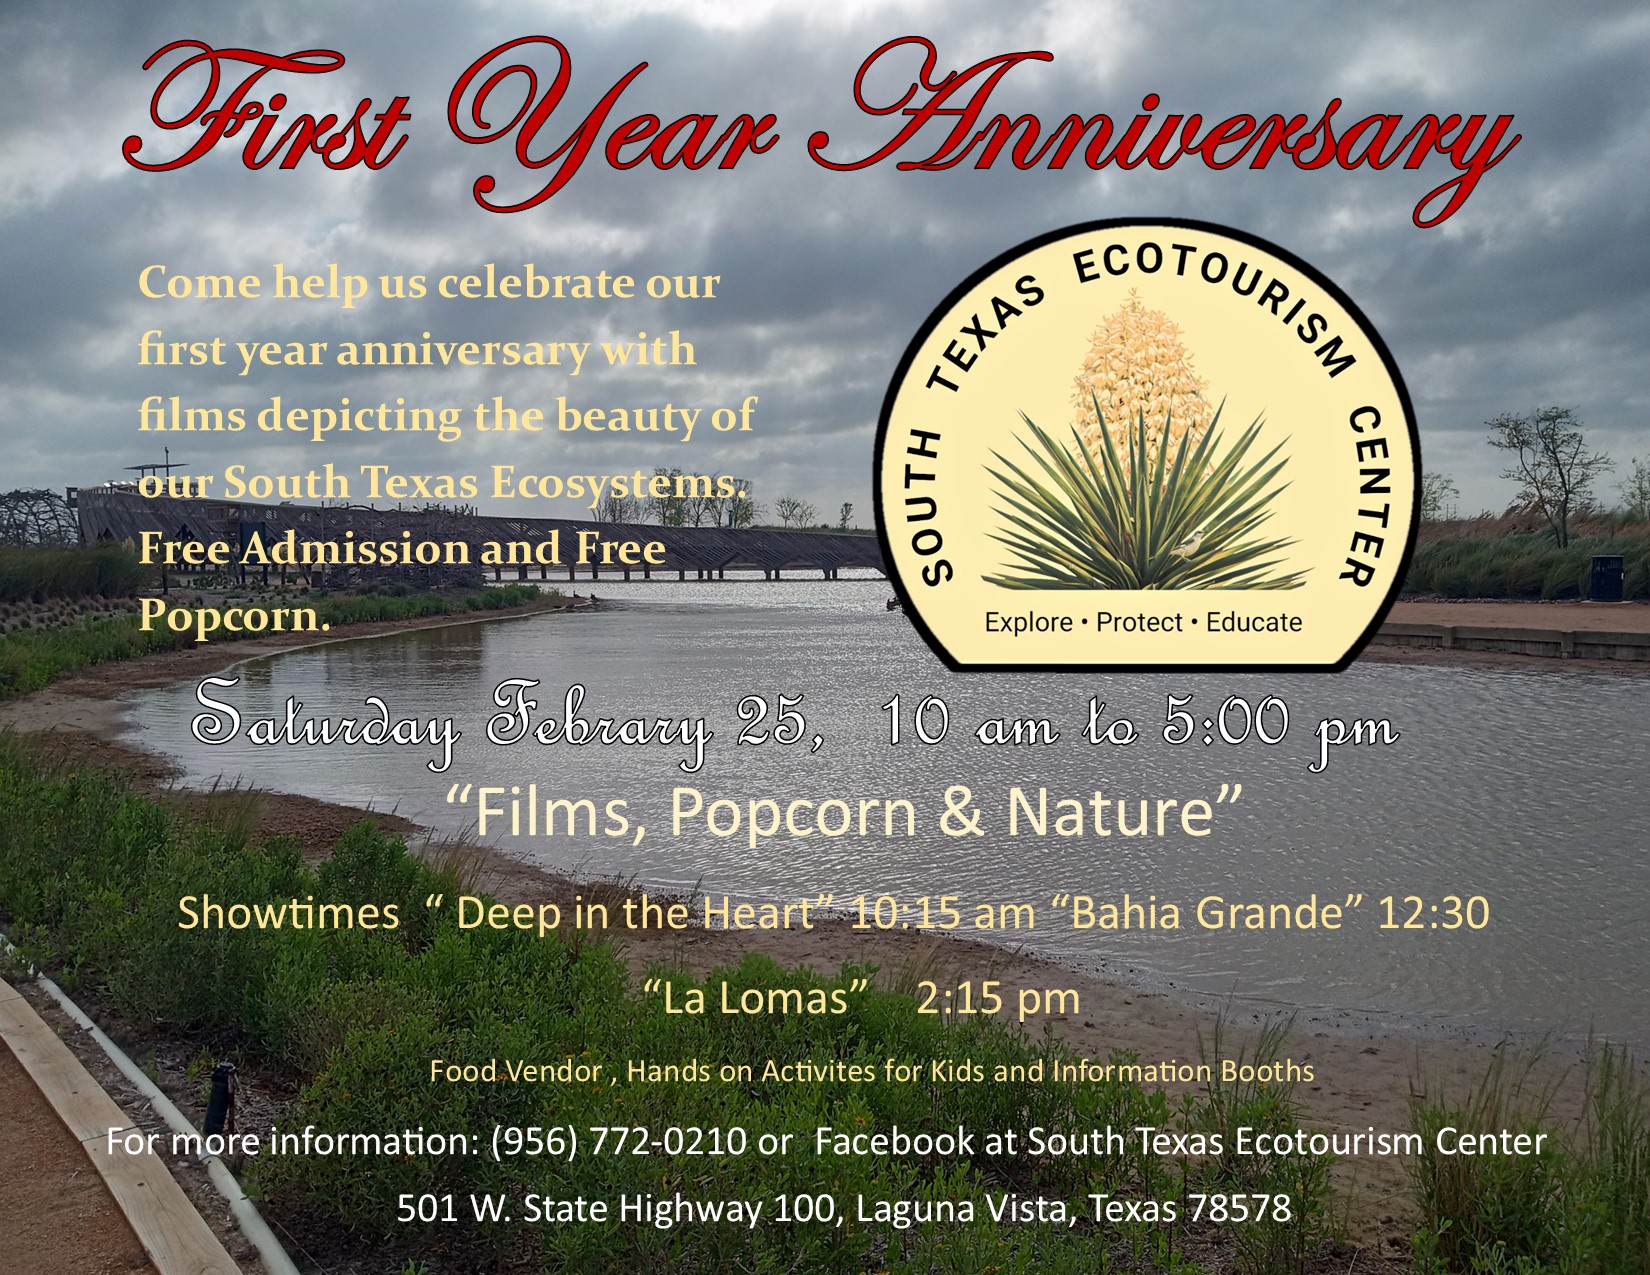 South Texas Ecotourism Center - First Year Anniversary